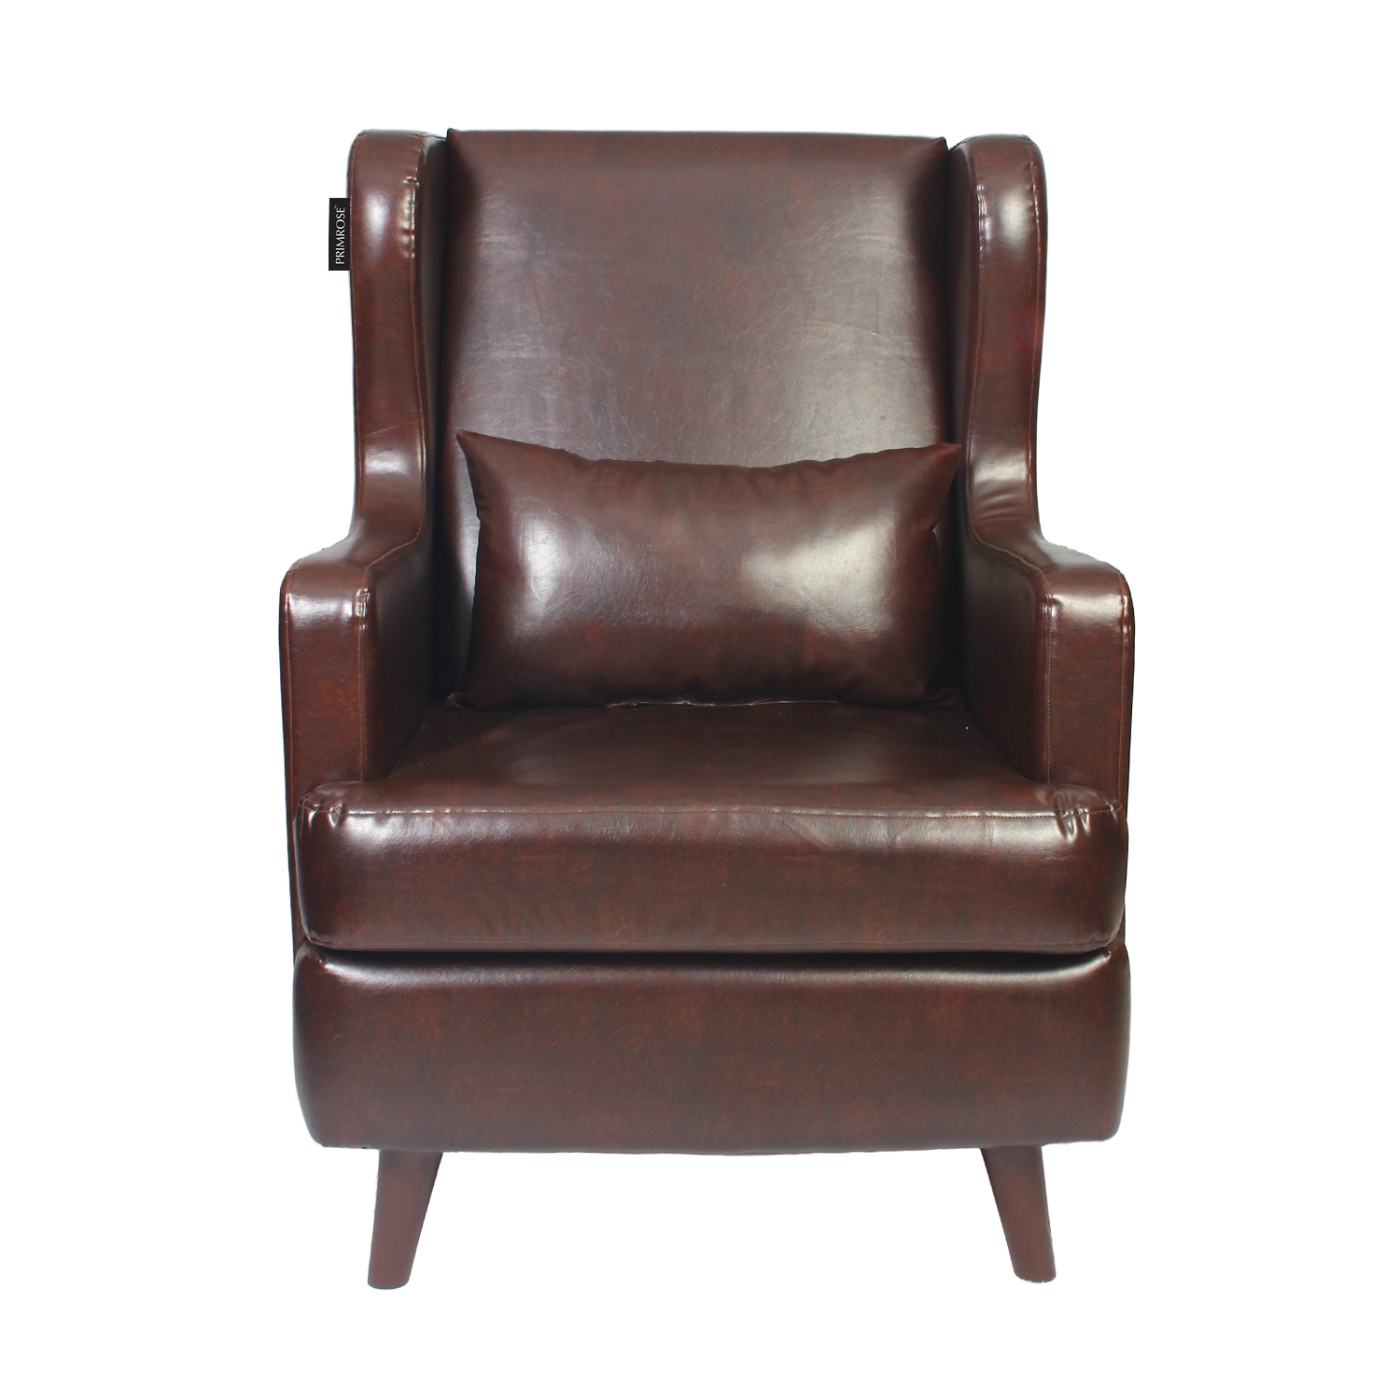 PRIMROSE Wing High Back Art Leather Fabric Chair - Coffee Brown  